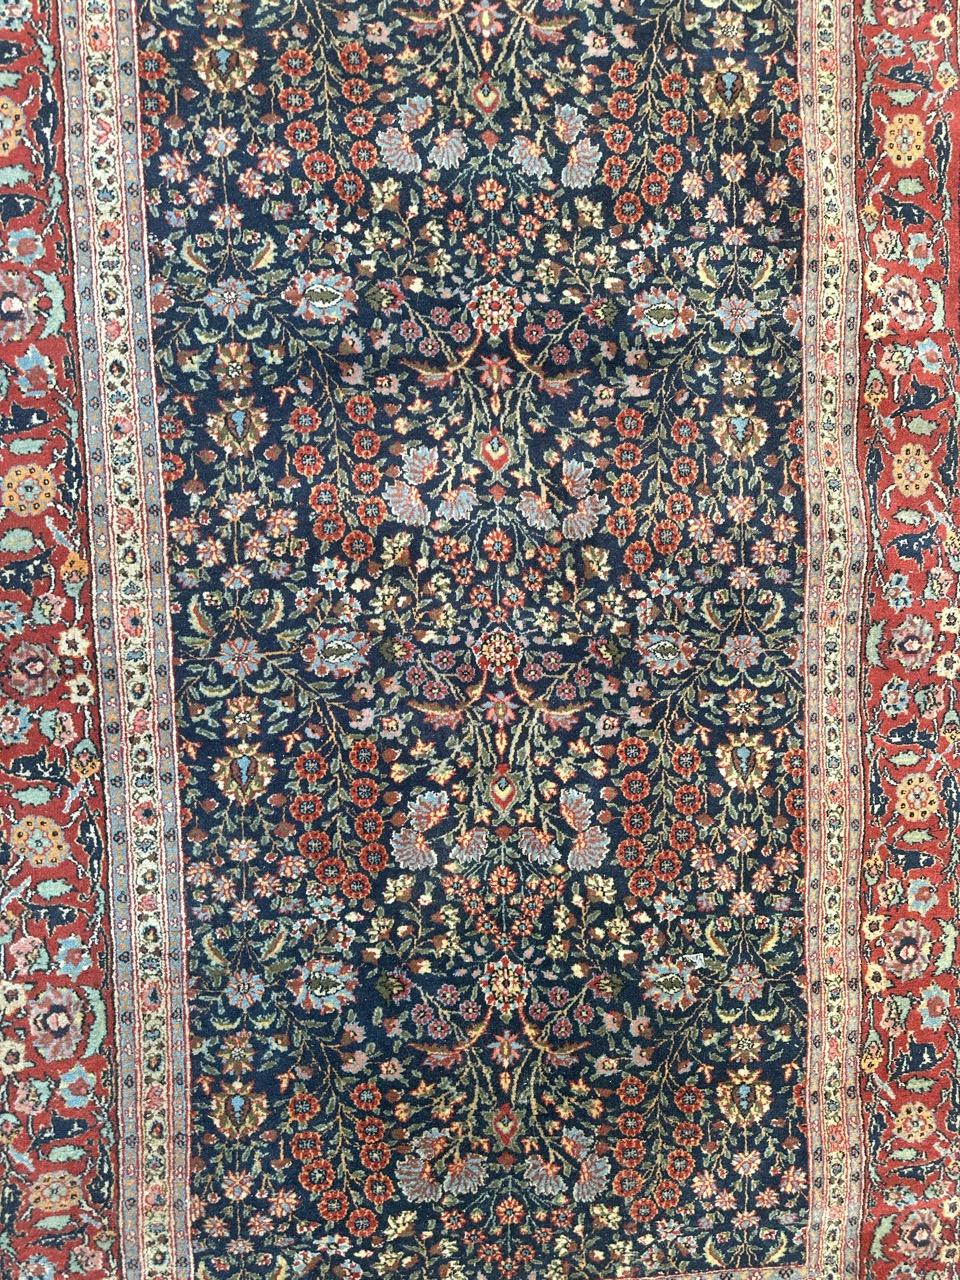 Beautiful late 20th century Turkish rug with a beautiful floral 